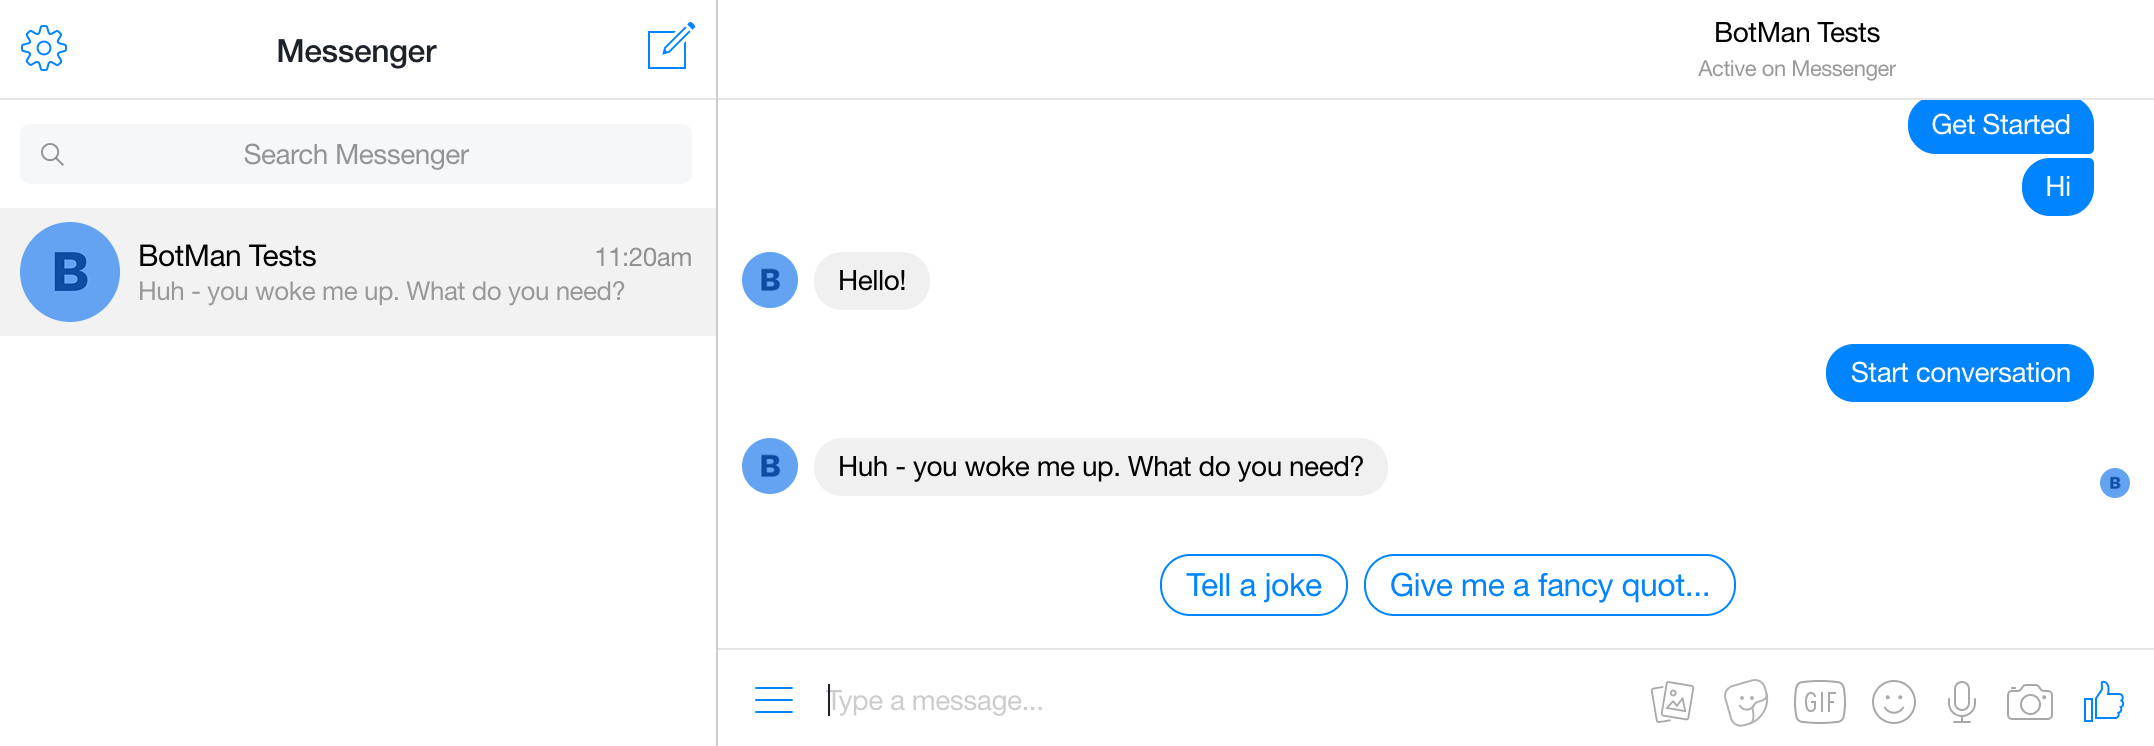 Screenshot showing how to test the BotMan example conversation